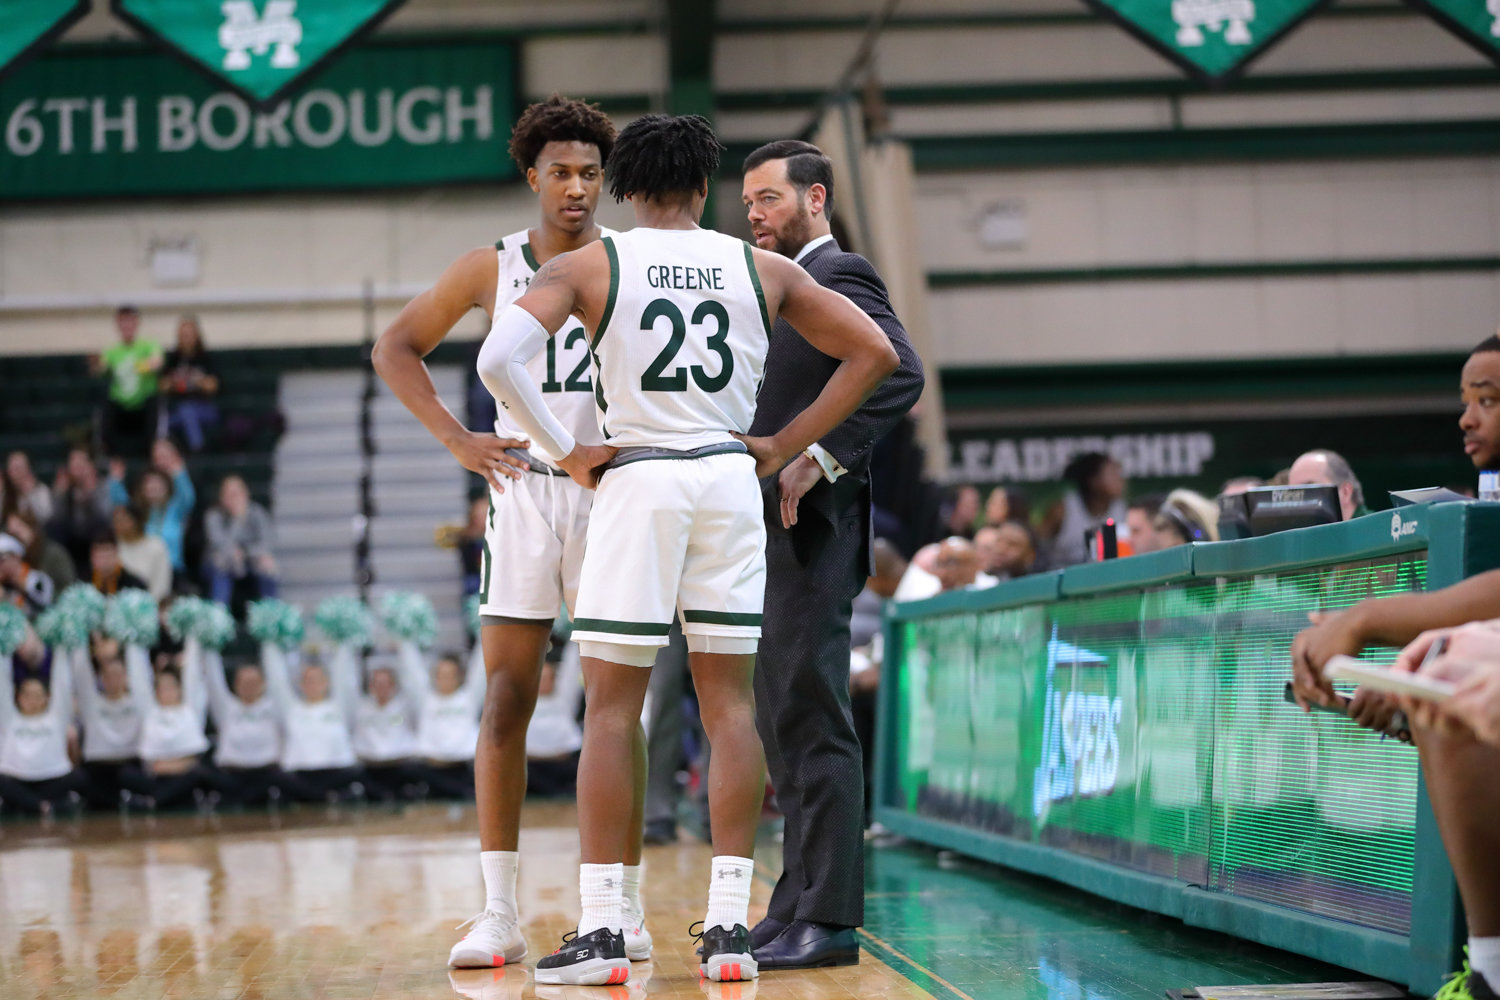 Manhattan head coach Steve Masiello called last week’s MAAC Tournament ‘eerie’ and ‘surreal’ when the tourney was canceled due to the coronavirus pandemic.